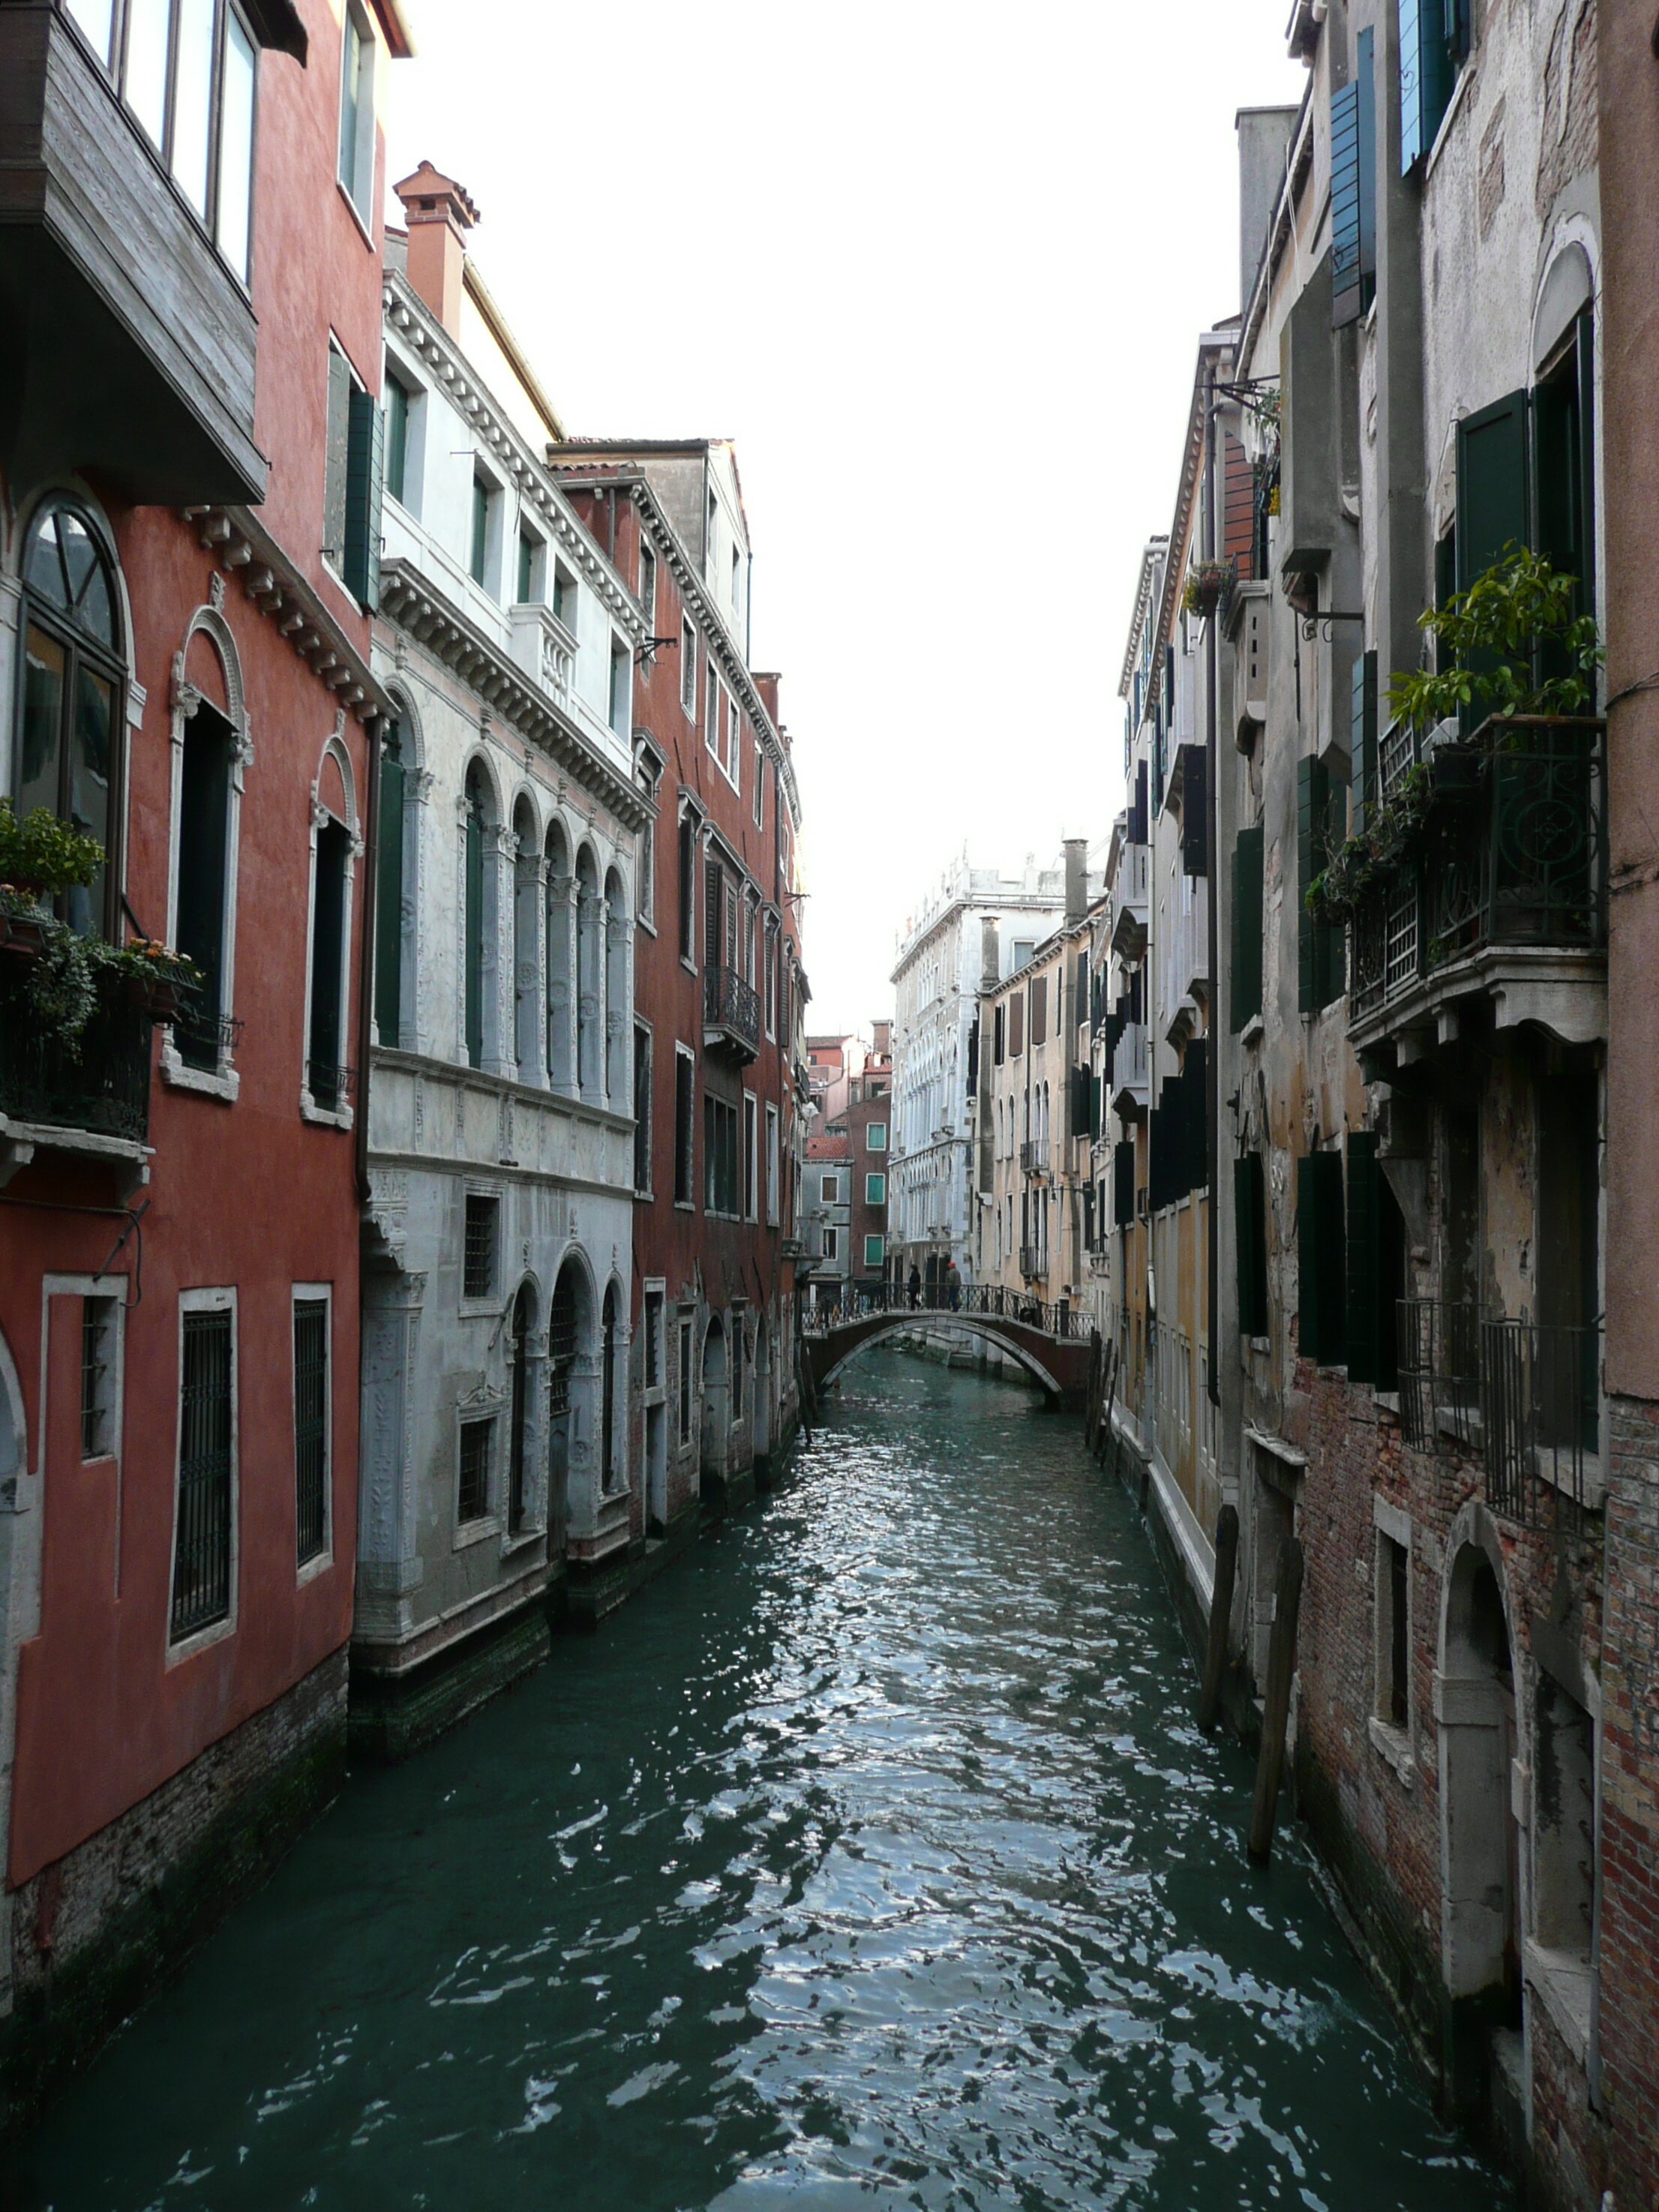 File:Small Canal in Venice.JPG - Wikimedia Commons